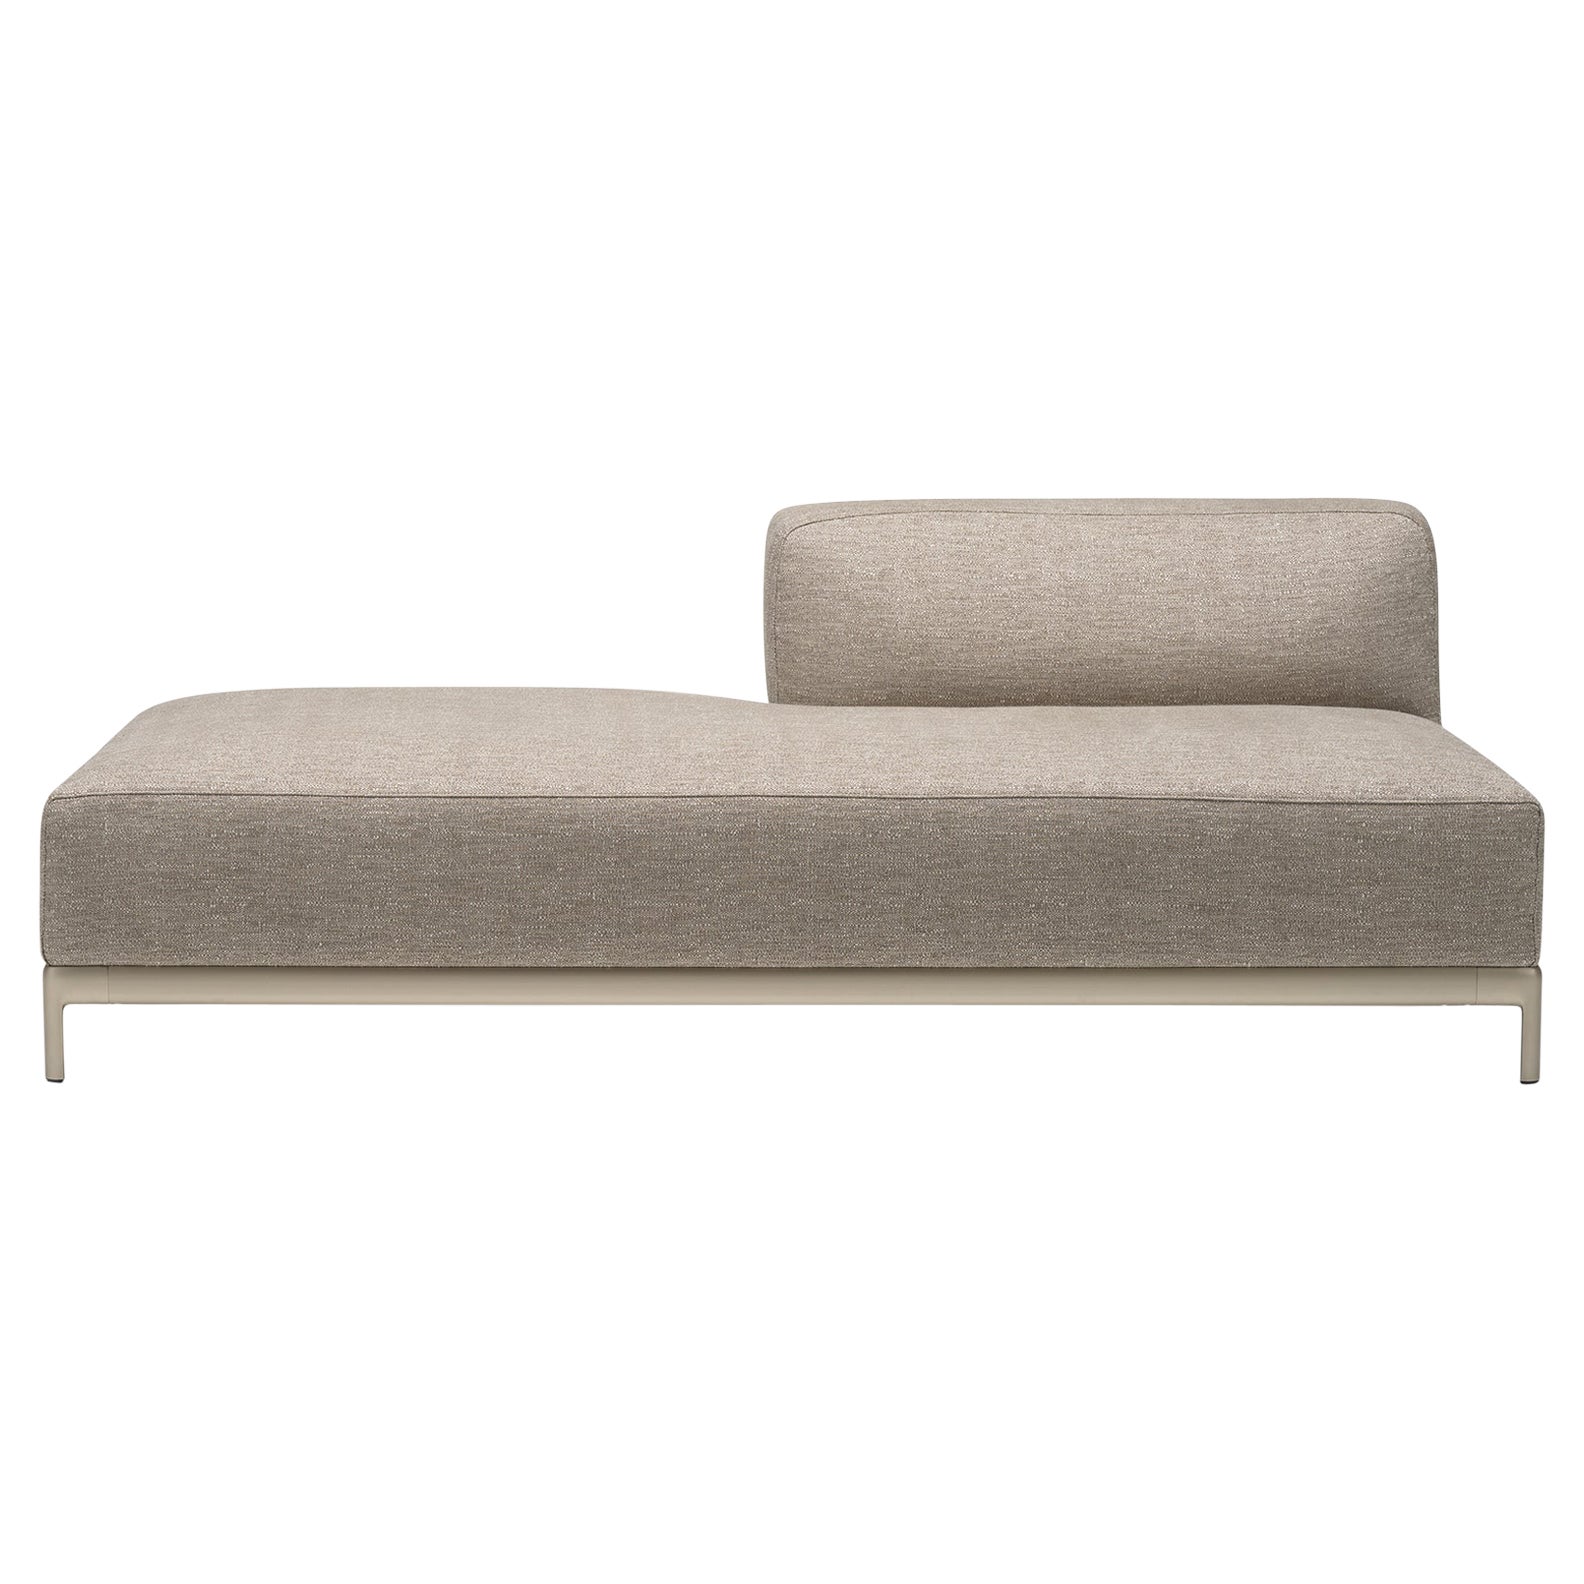 Alias P41 AluZen Soft Ending Sofa in Brown Upholstery & Anodized Gold Frame For Sale